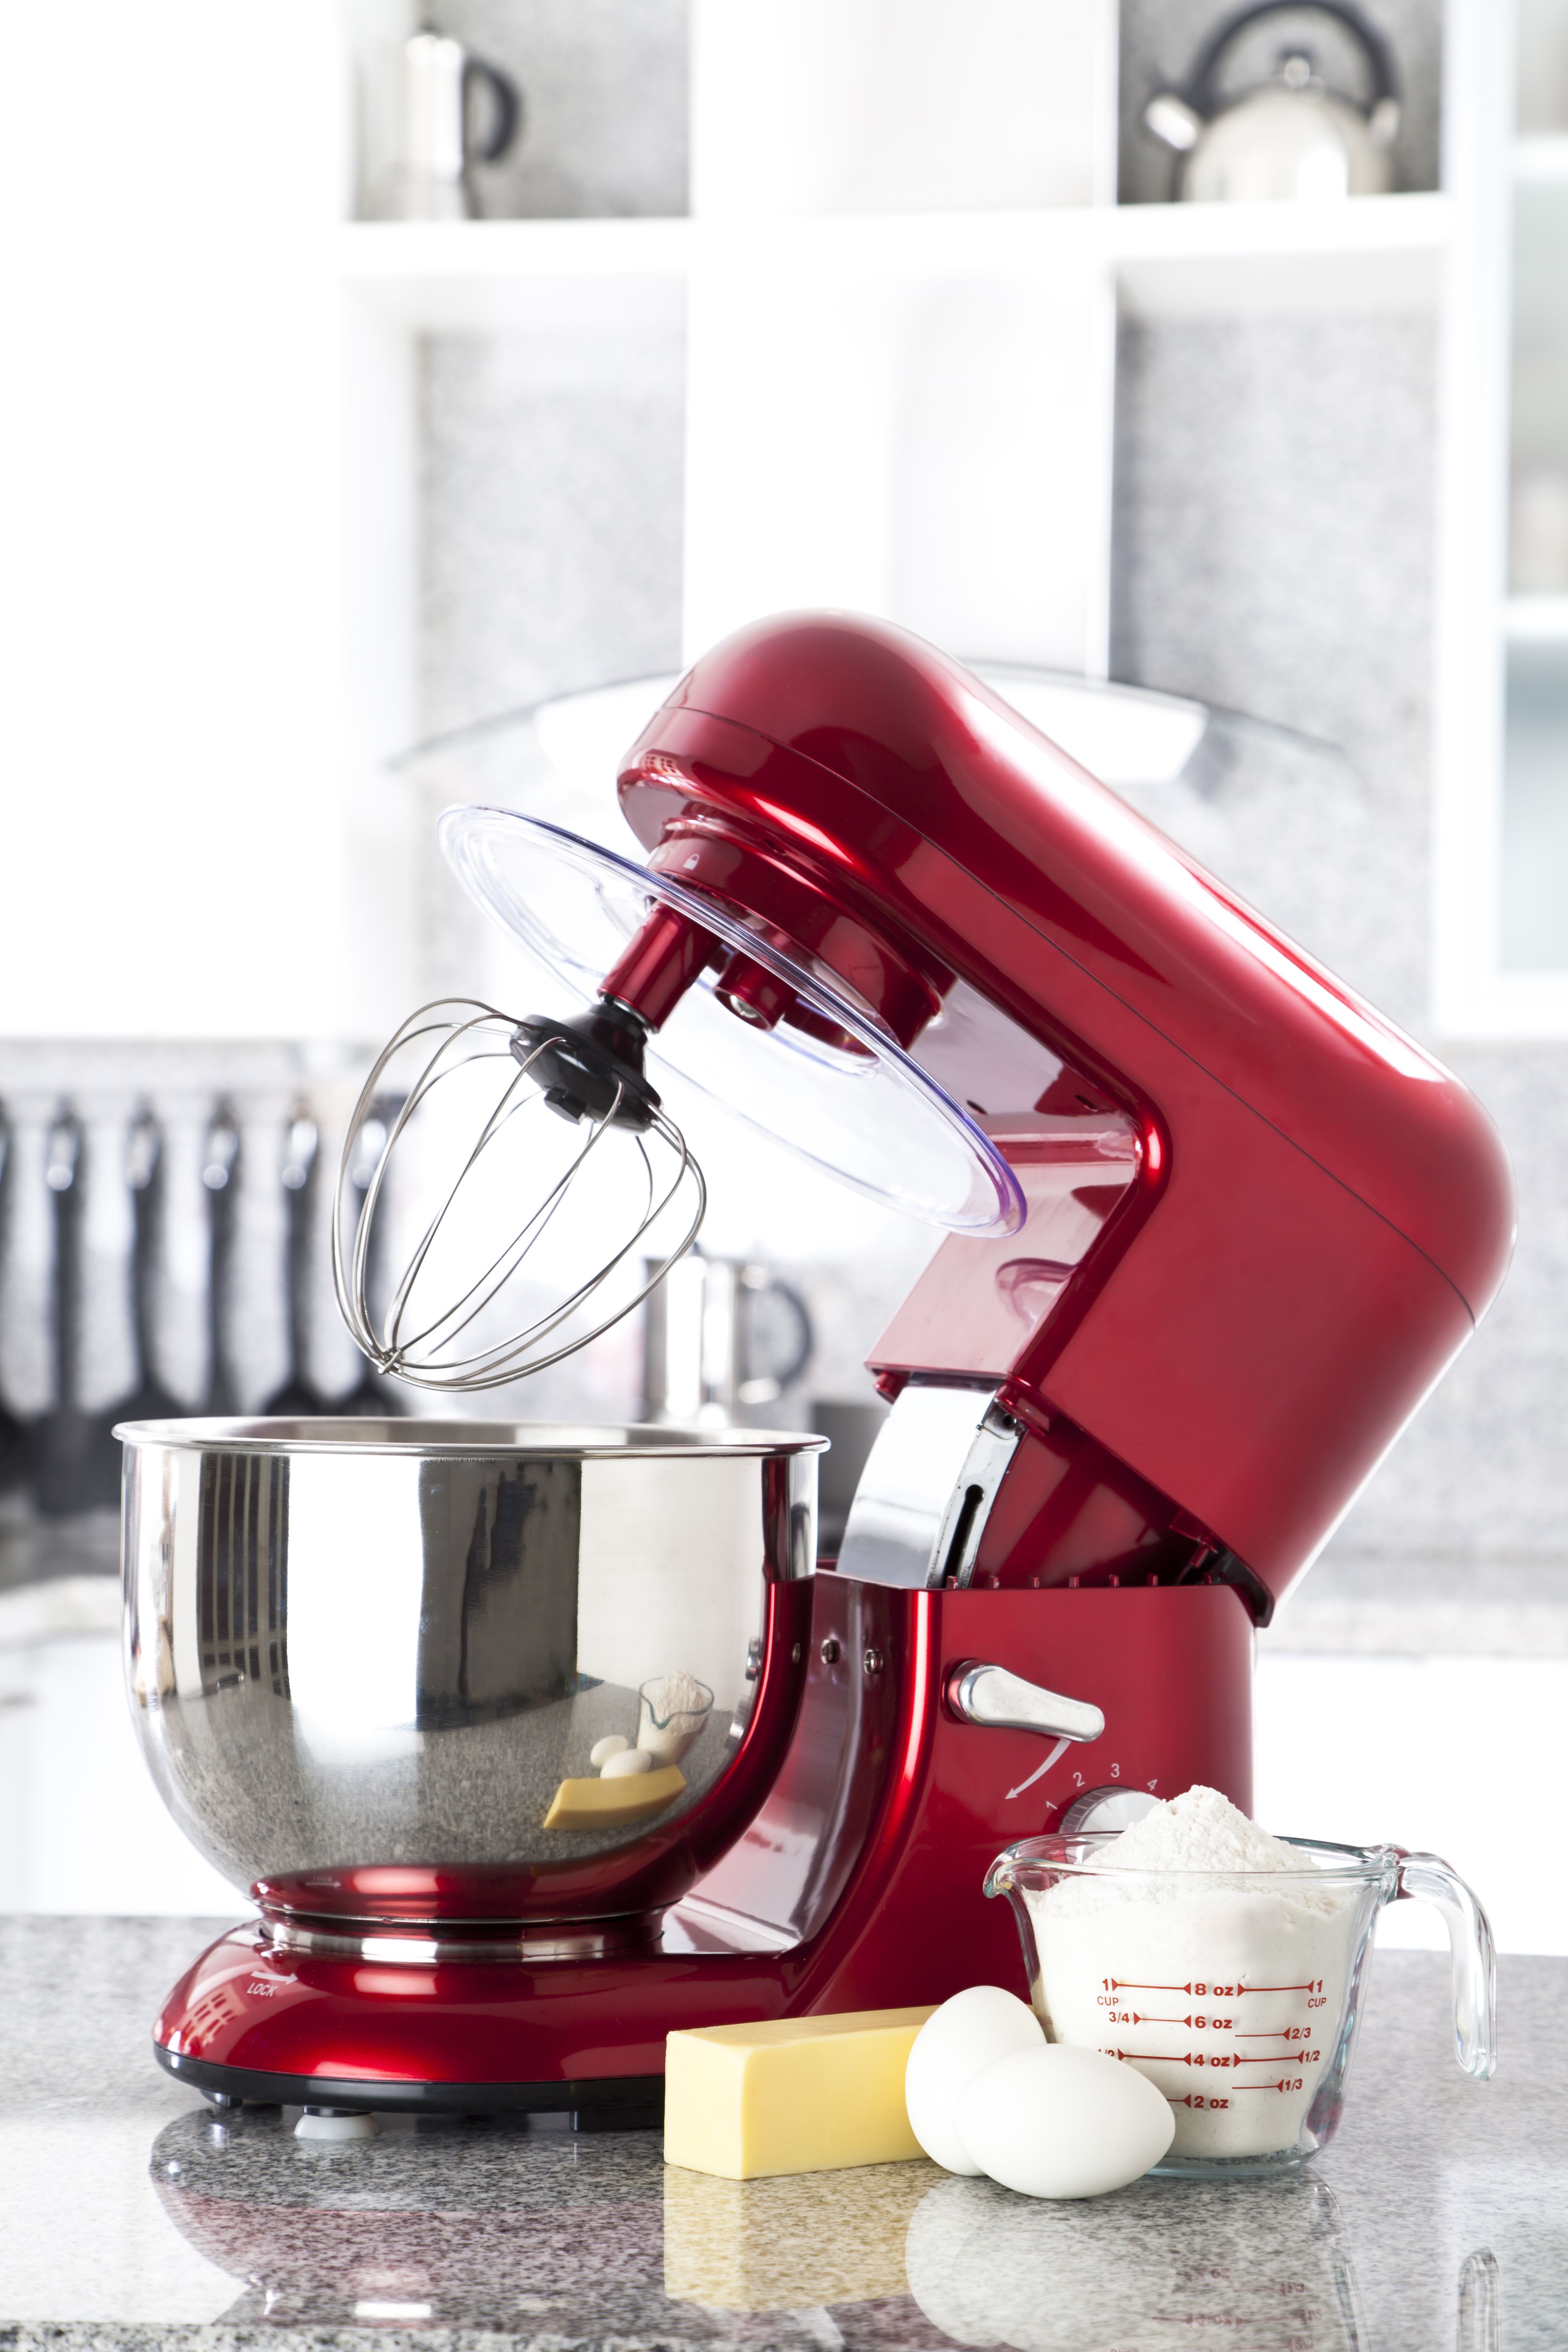 Before You Buy A Stand Mixer